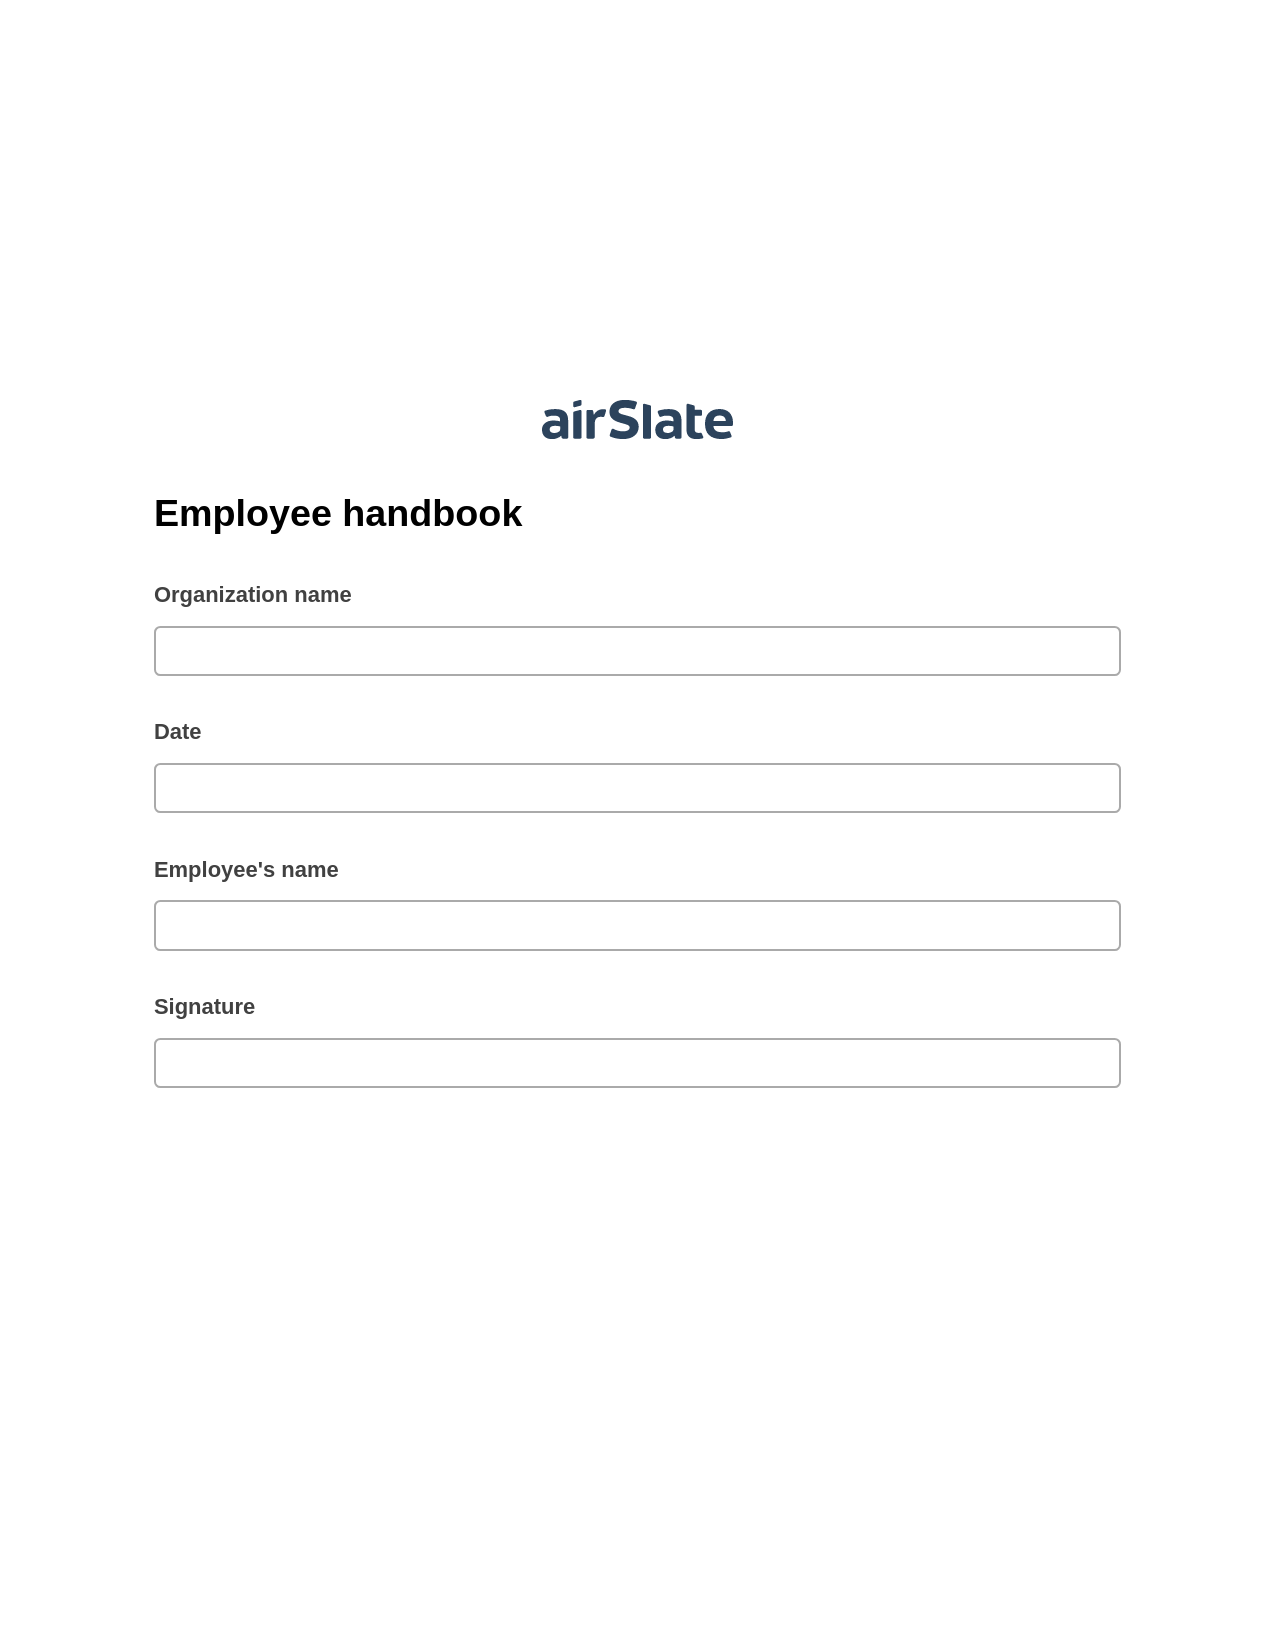 Multirole Employee handbook Pre-fill from Salesforce Records with SOQL Bot, Send Mailchimp Campaign Bot, Post-finish Document Bot